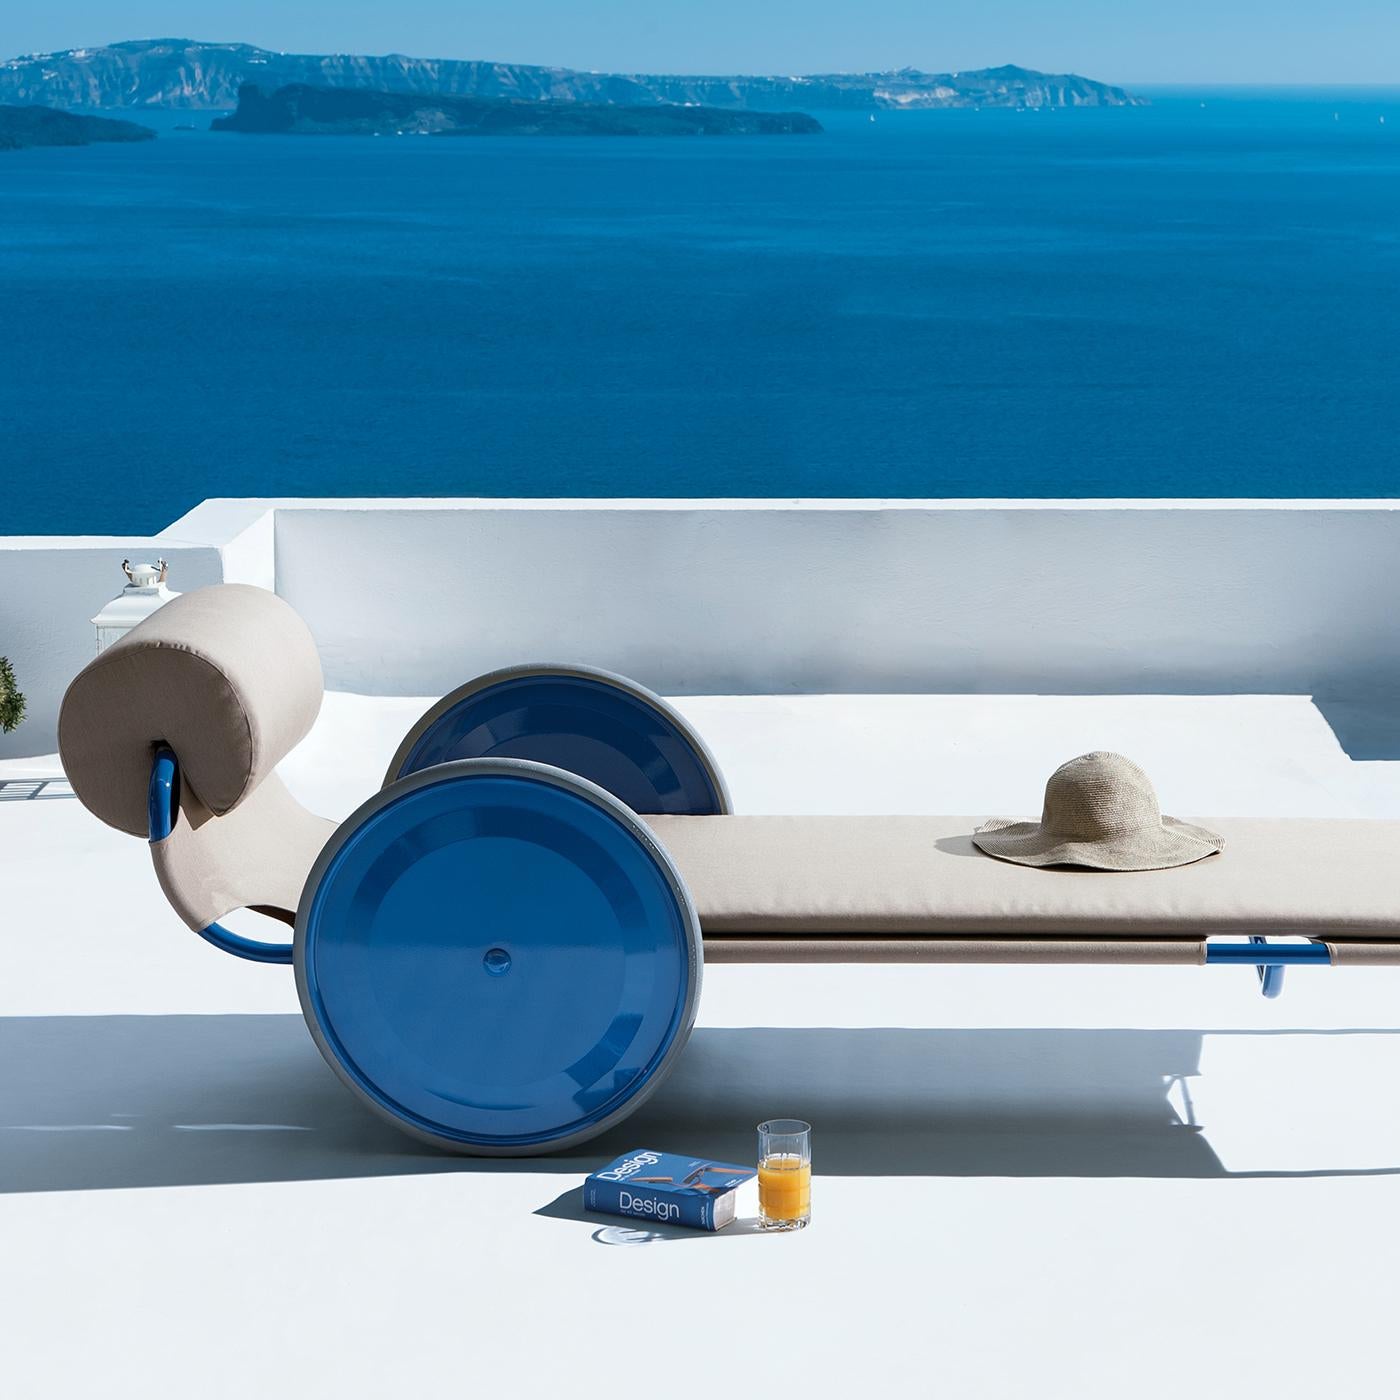 Echoing Gae Aulenti's architectural work and penchant for color, this sun lounger will help create a colorful atmosphere in a modern and eclectic garden, patio and pool area. Part of the iconic Locus Solus collection designed in 1964, the linear